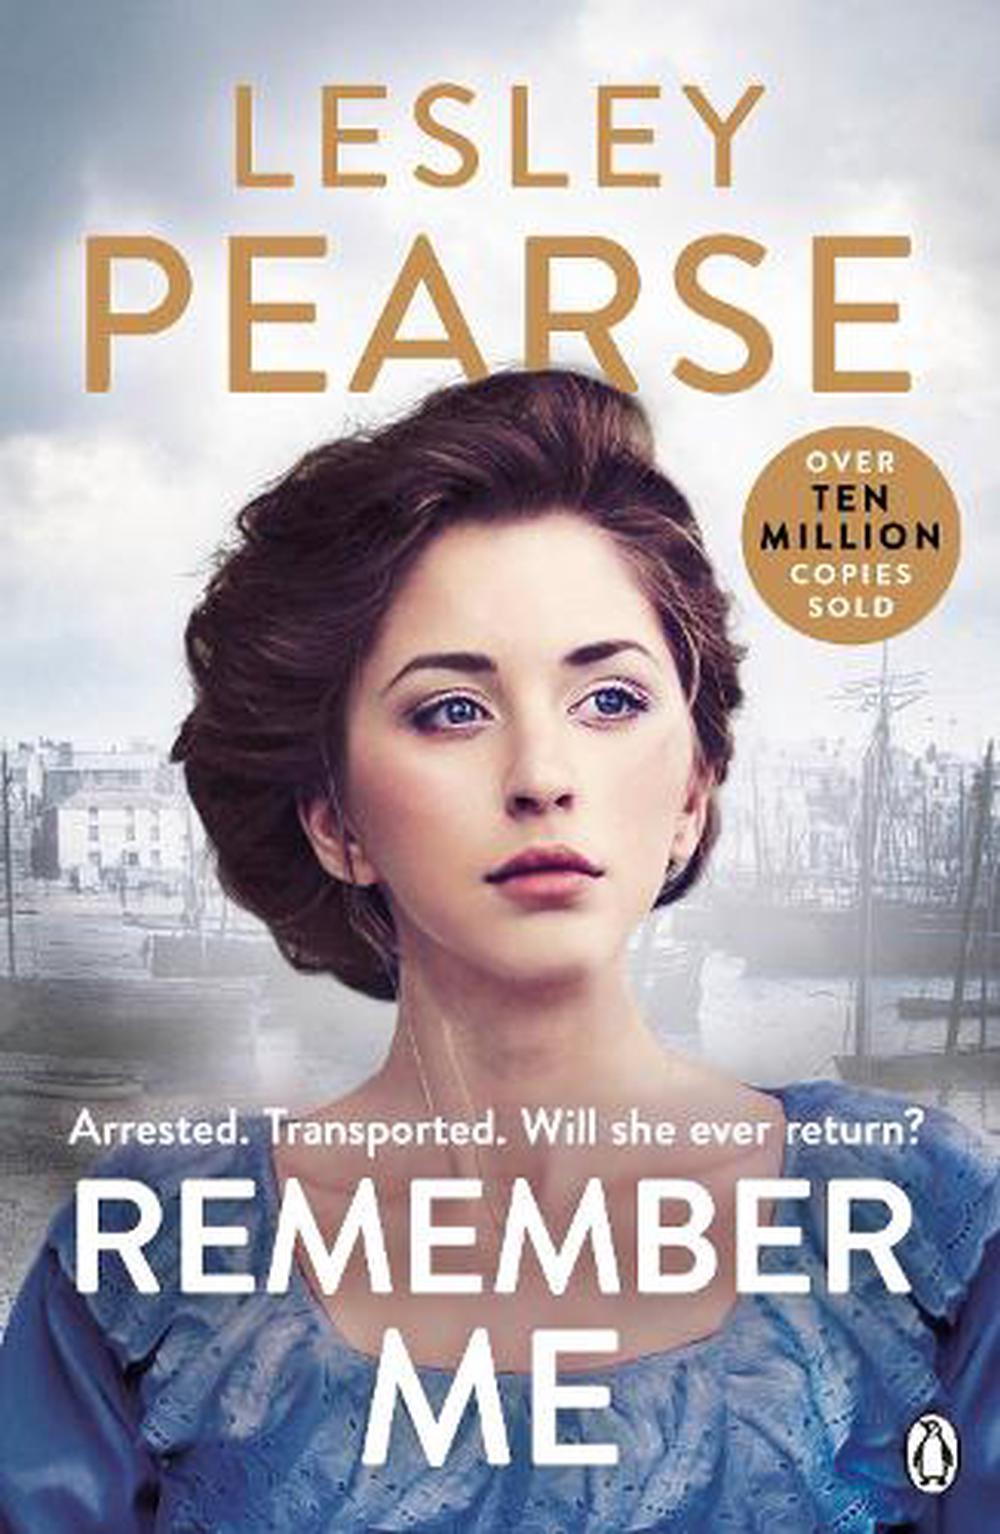 Remember Me by Lesley Pearse, Paperback, 9780141046082 | Buy online at ...